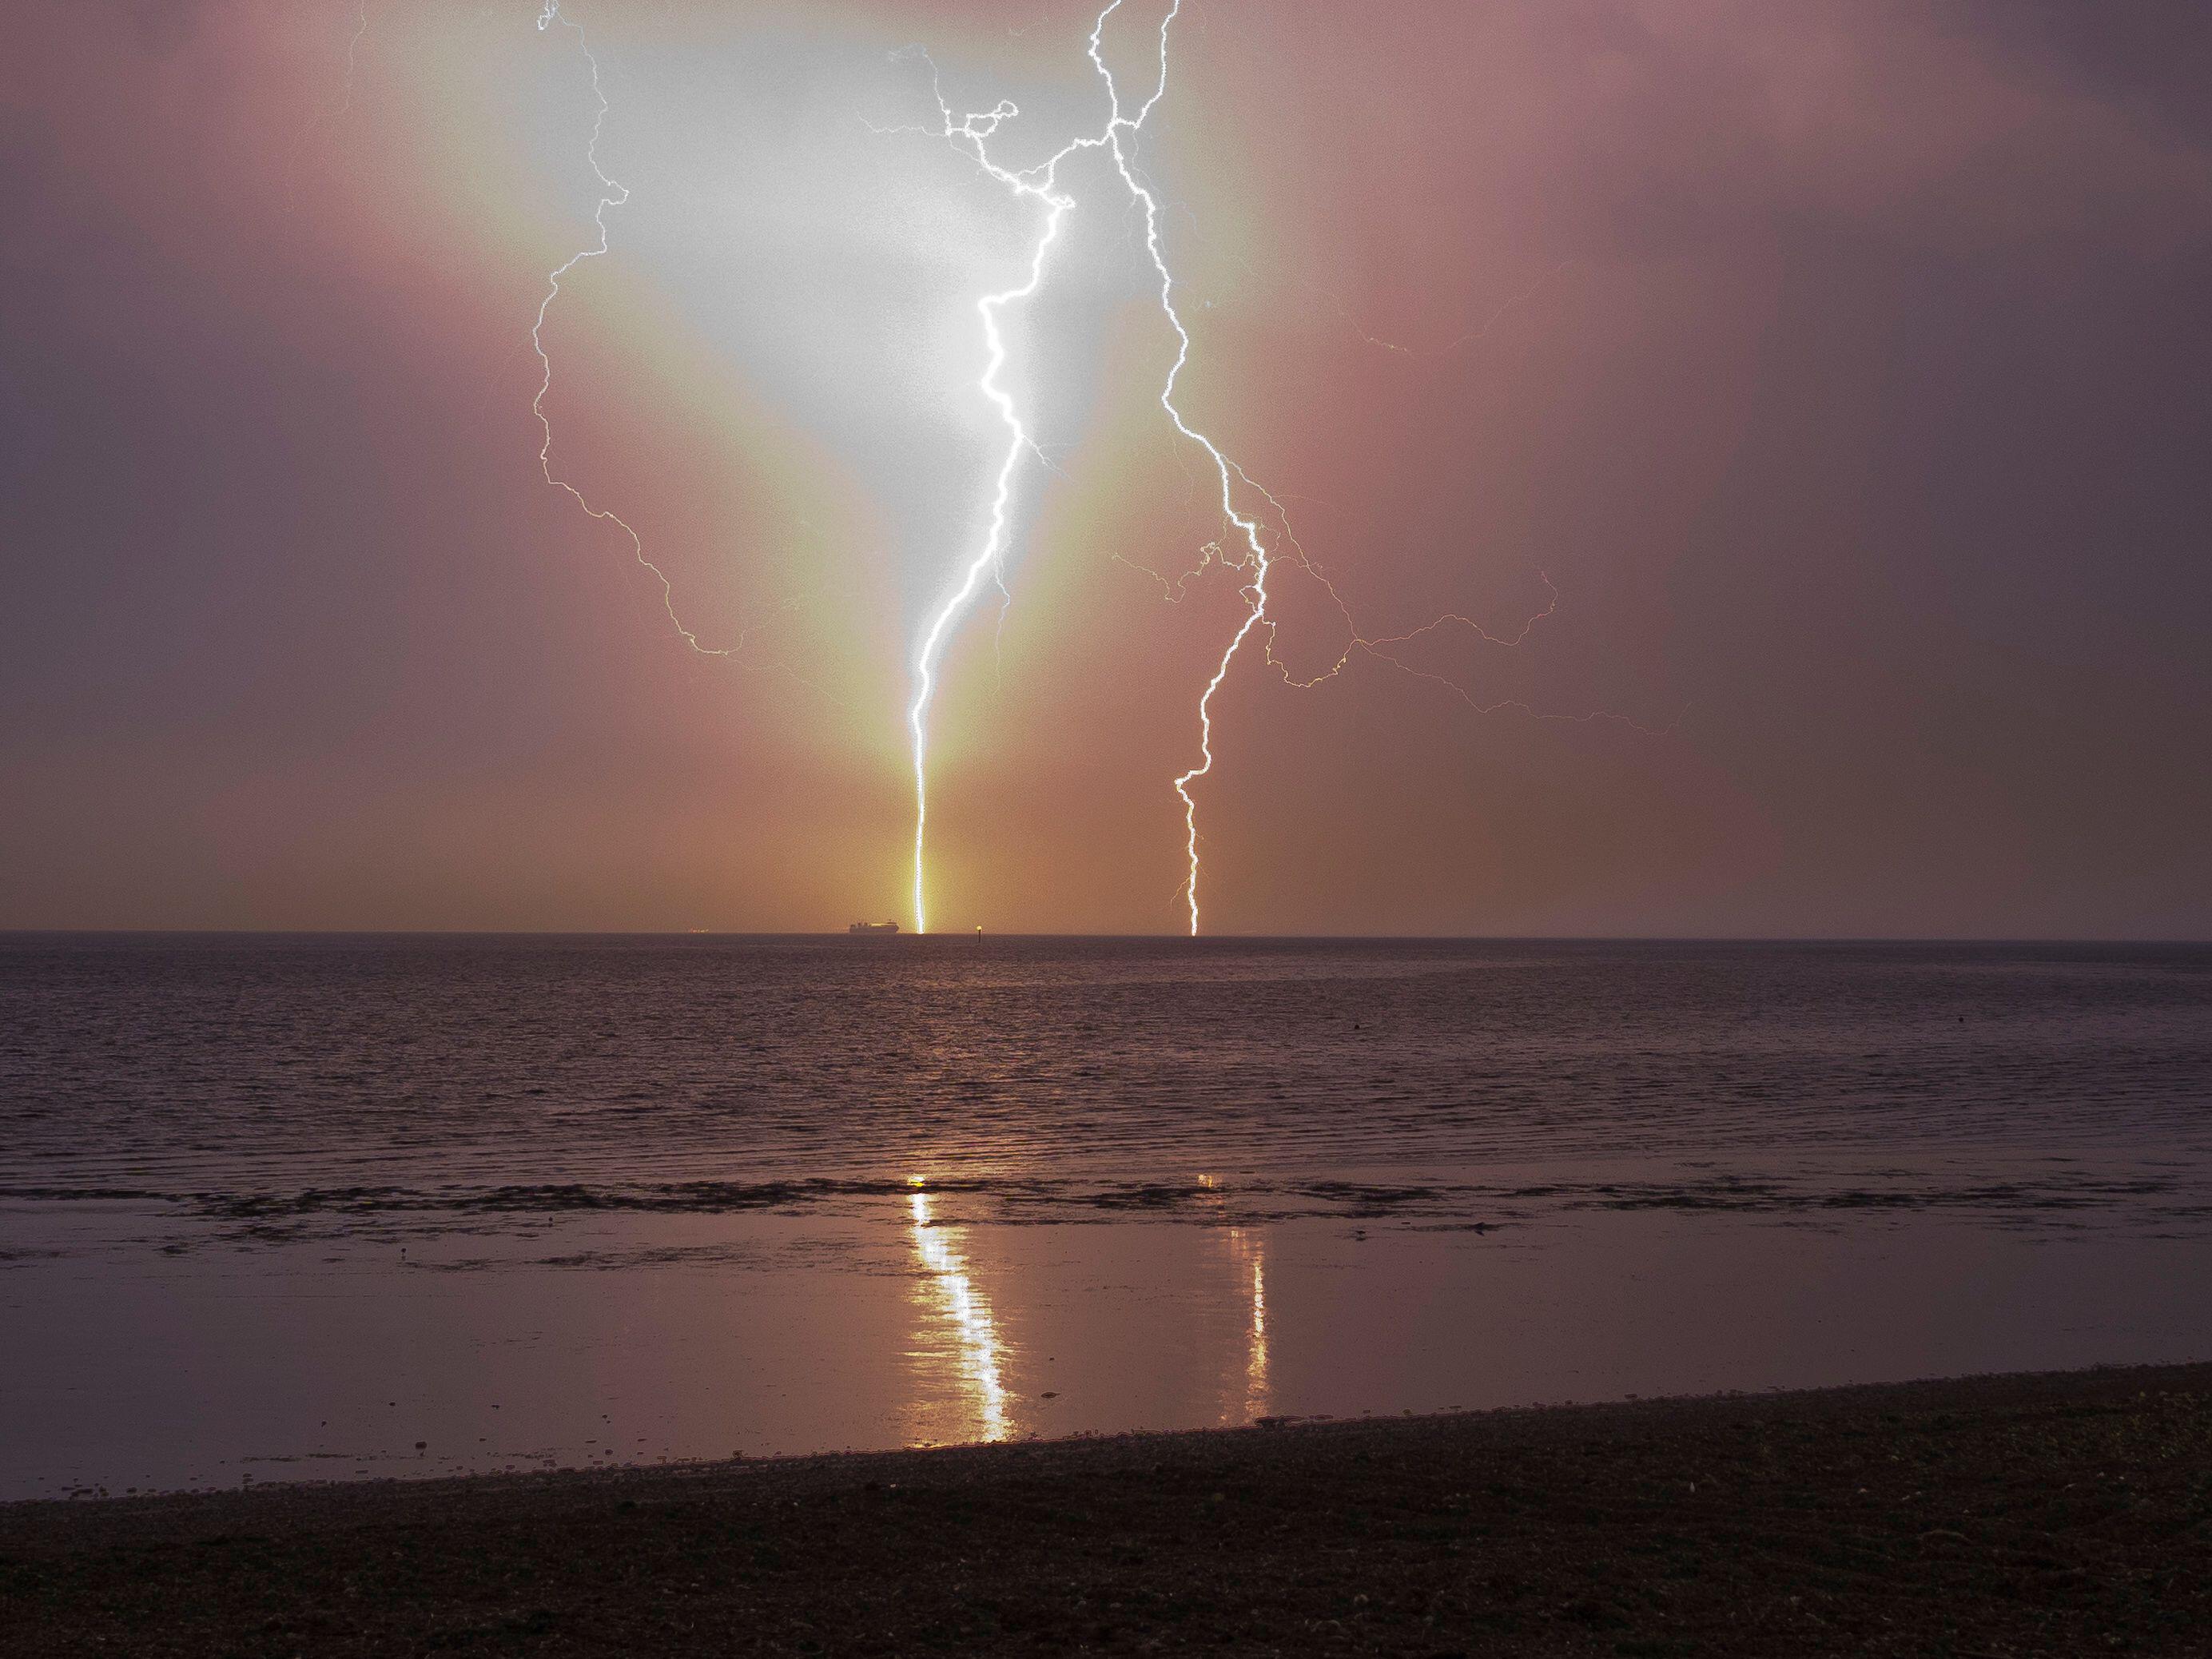 Thunderstorms and heavy rain are set to hit large swathes of the UK on Sunday, just one day after Saturday could possibly be the hottest day of the year so far